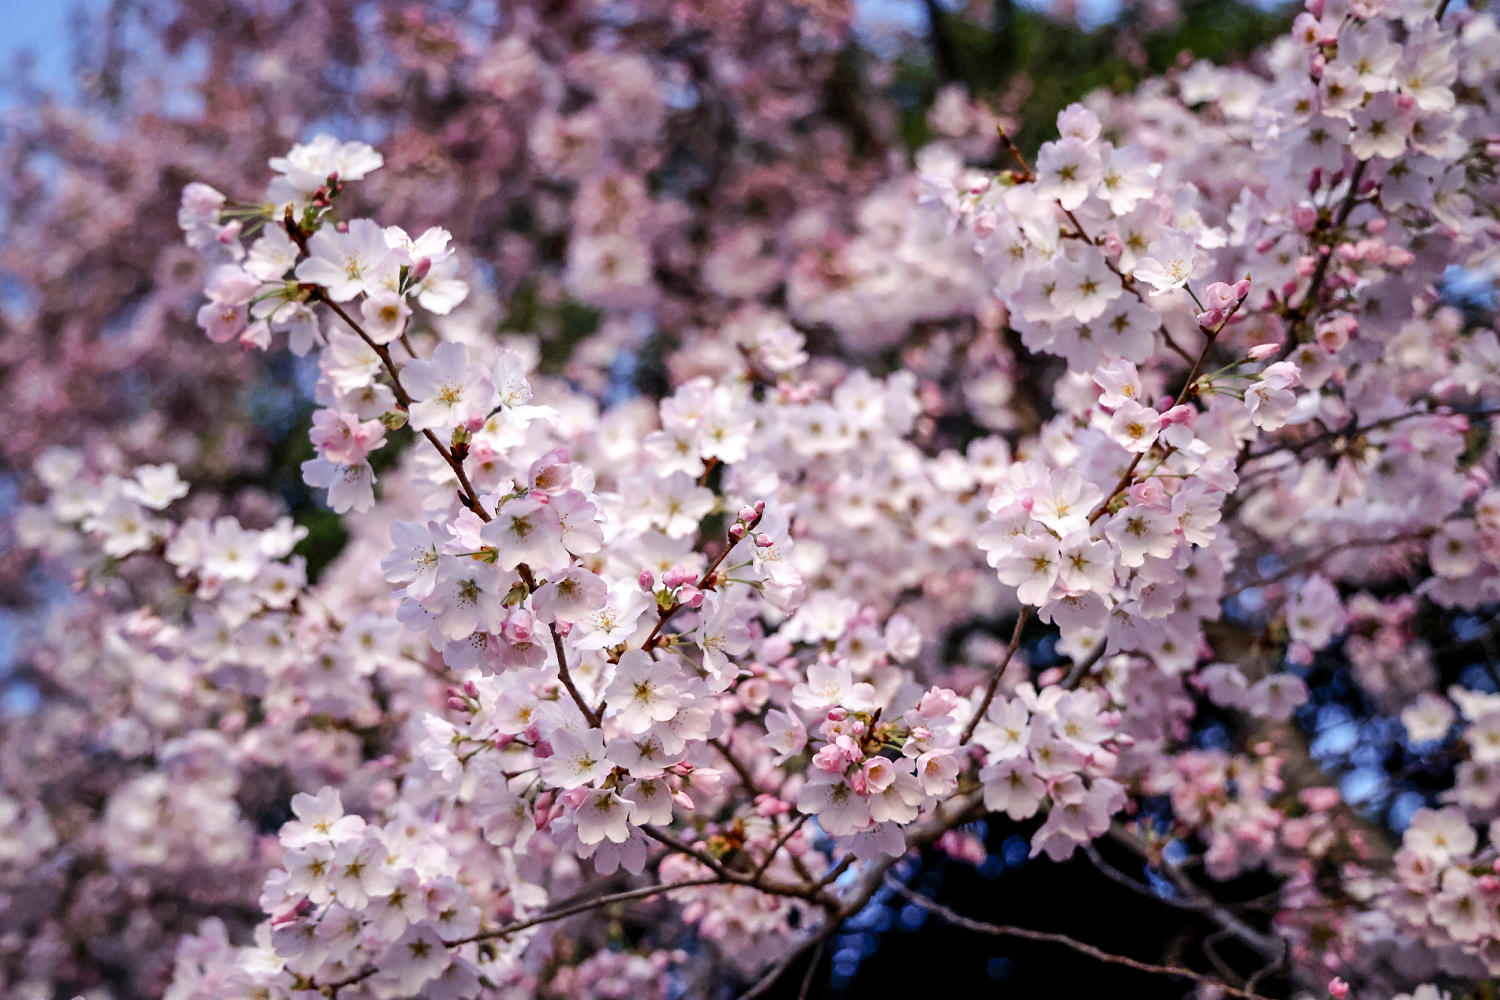 Japan gifts 250 new cherry trees to D.C., replacing those to be removed for repairs